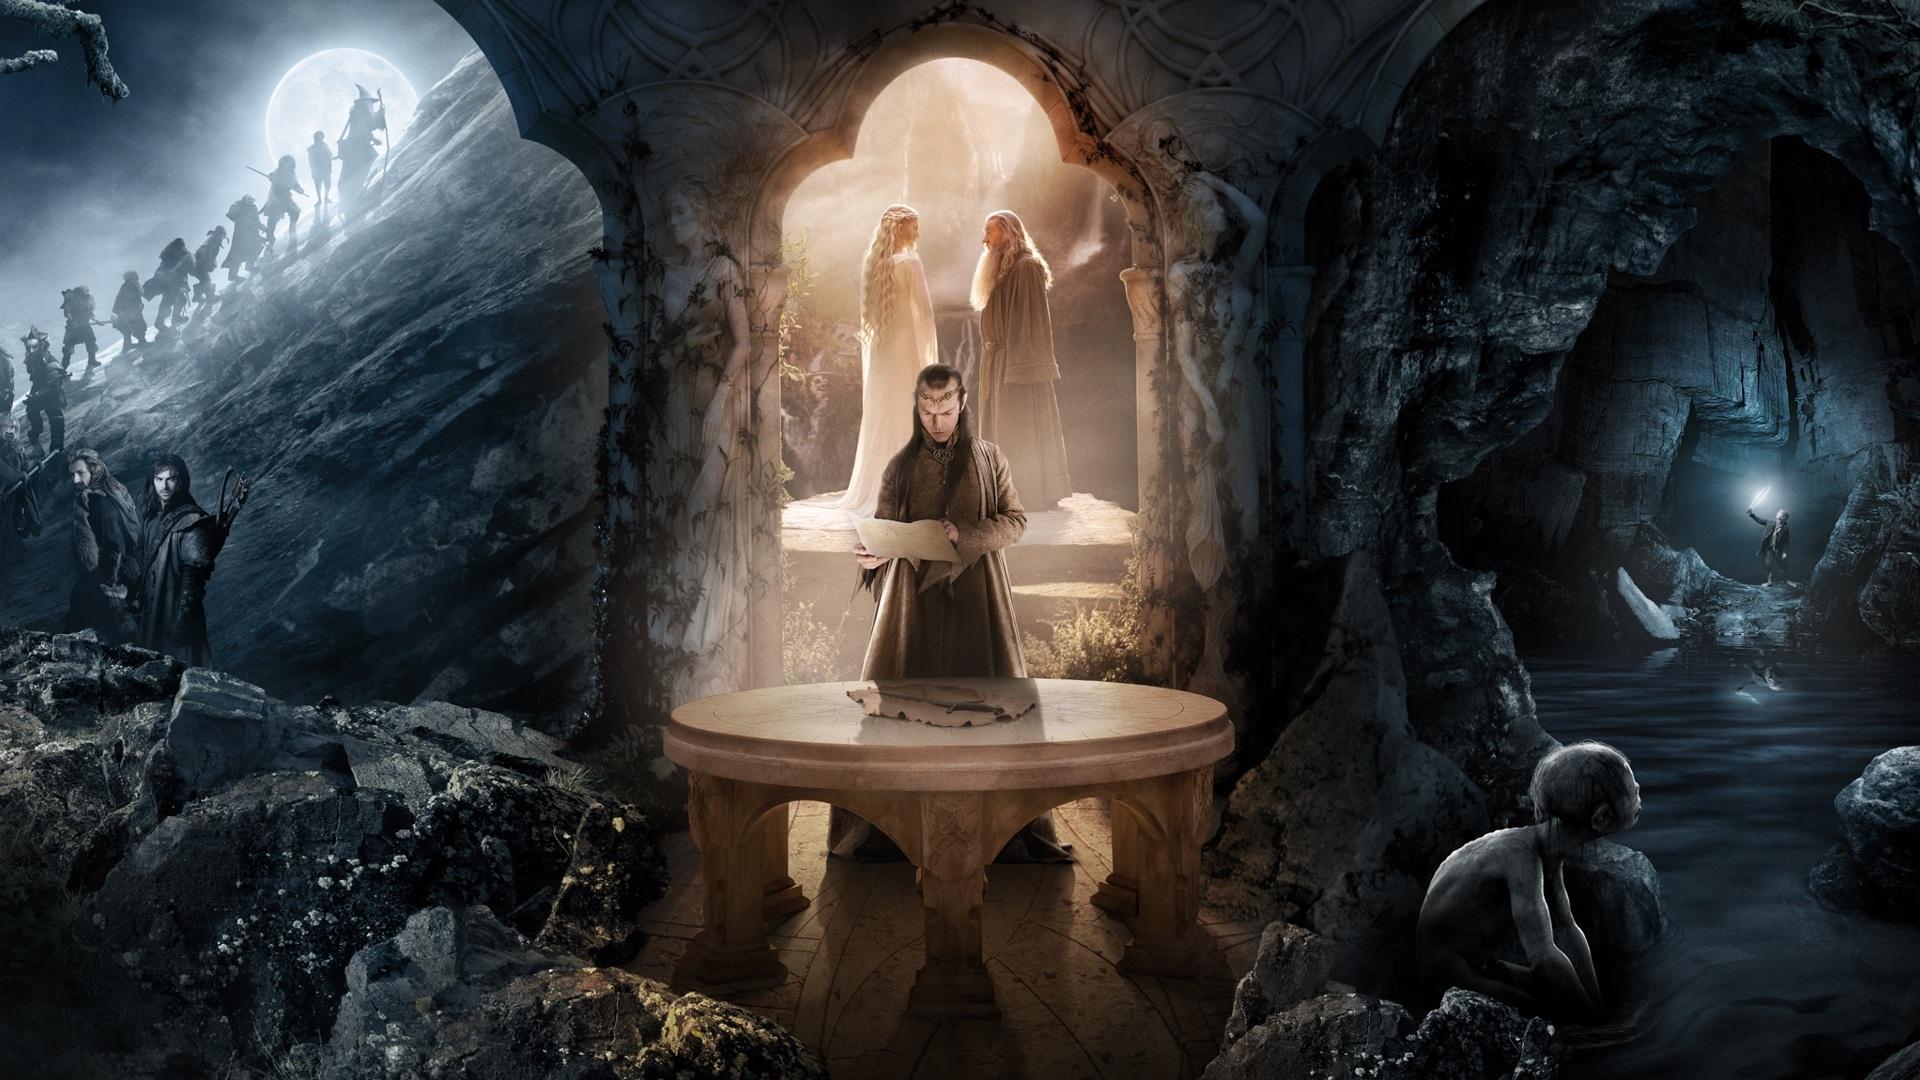 Free download THE HOBBIT AN UNEXPECTED JOURNEY fantasy elf